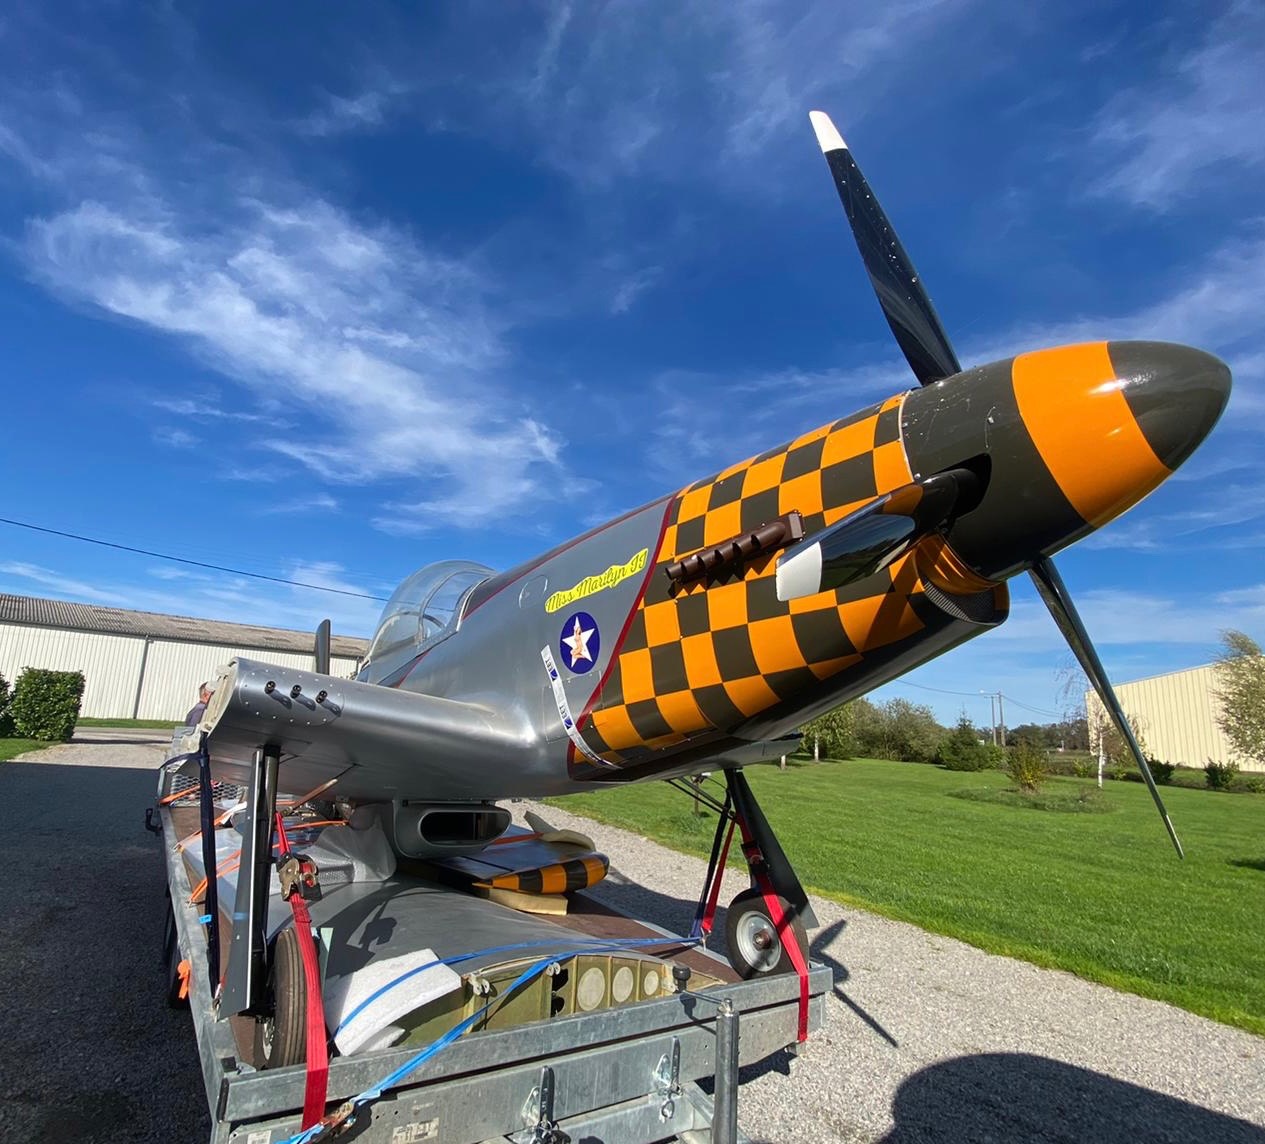 Ulm à vendre - Multiaxe - P 51 51 Mustang Loehle